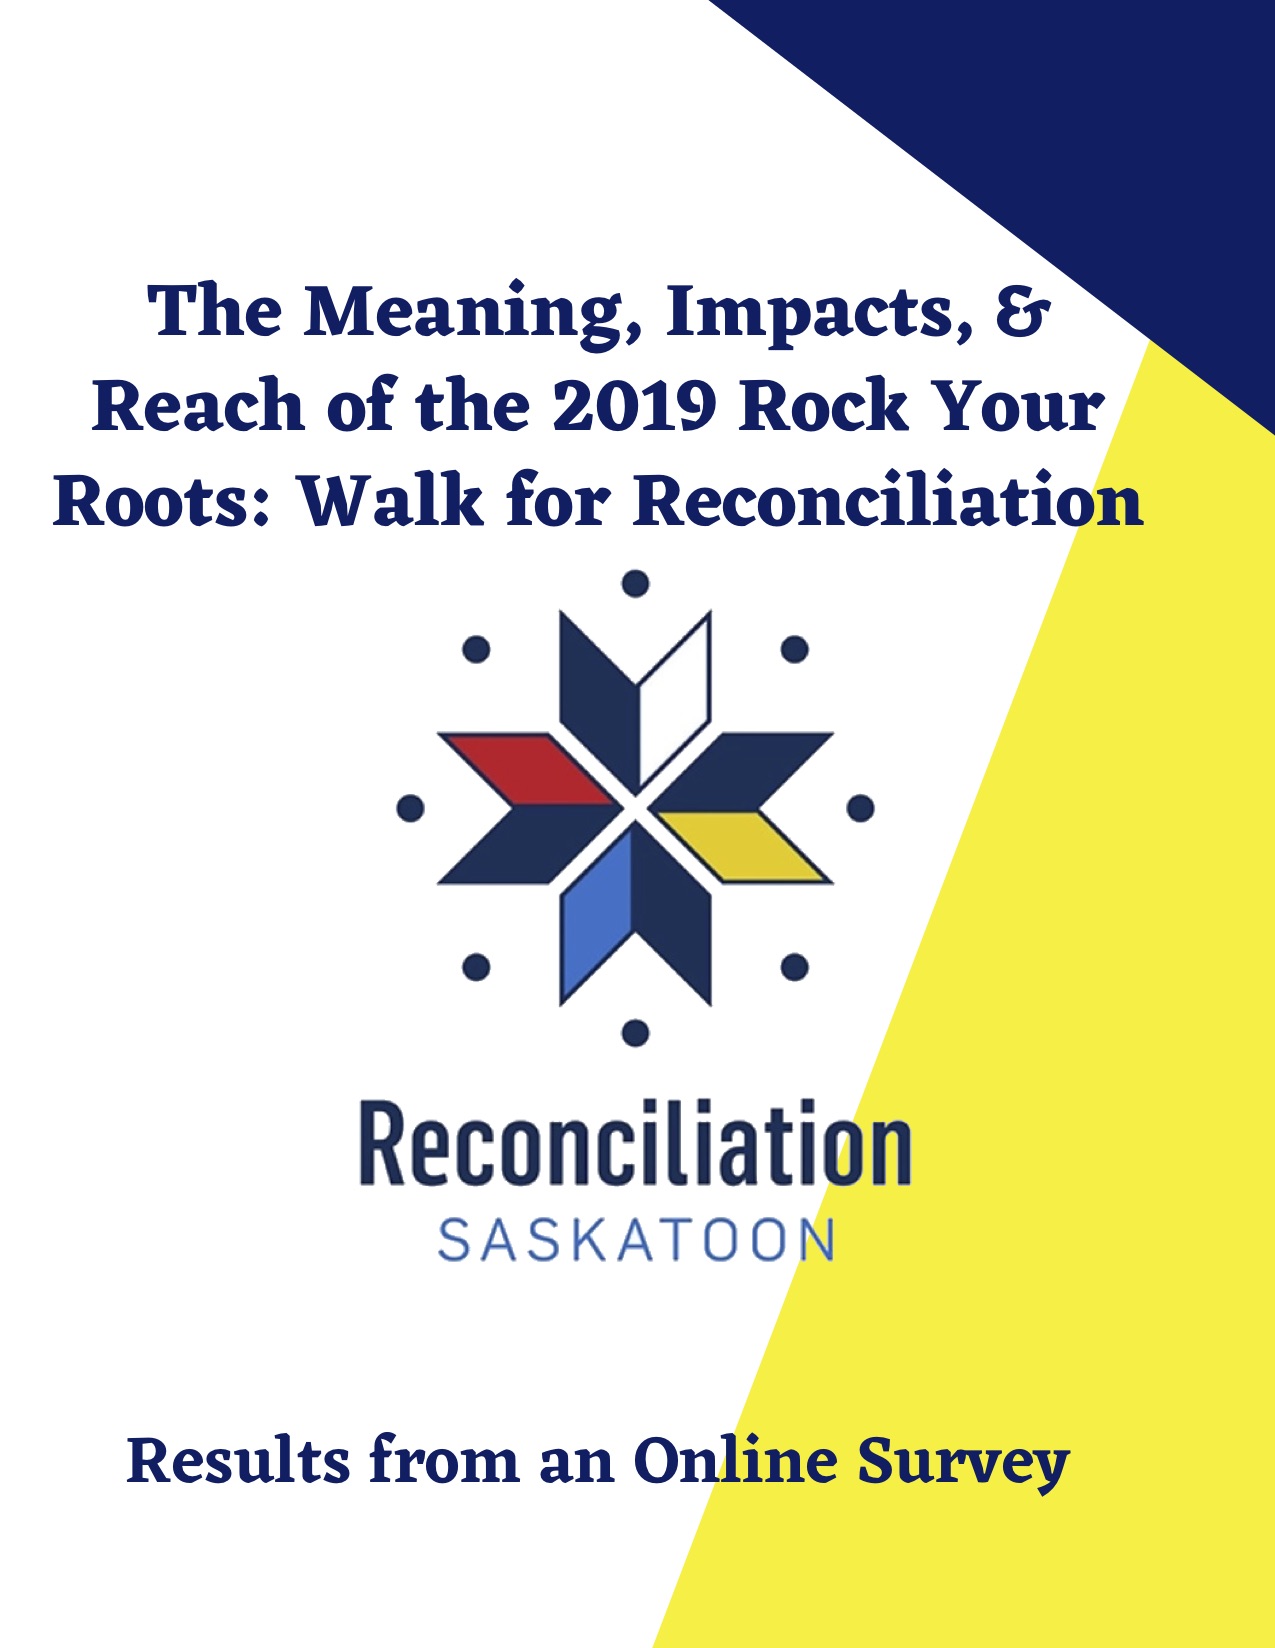 2019 Rock Your Roots Report